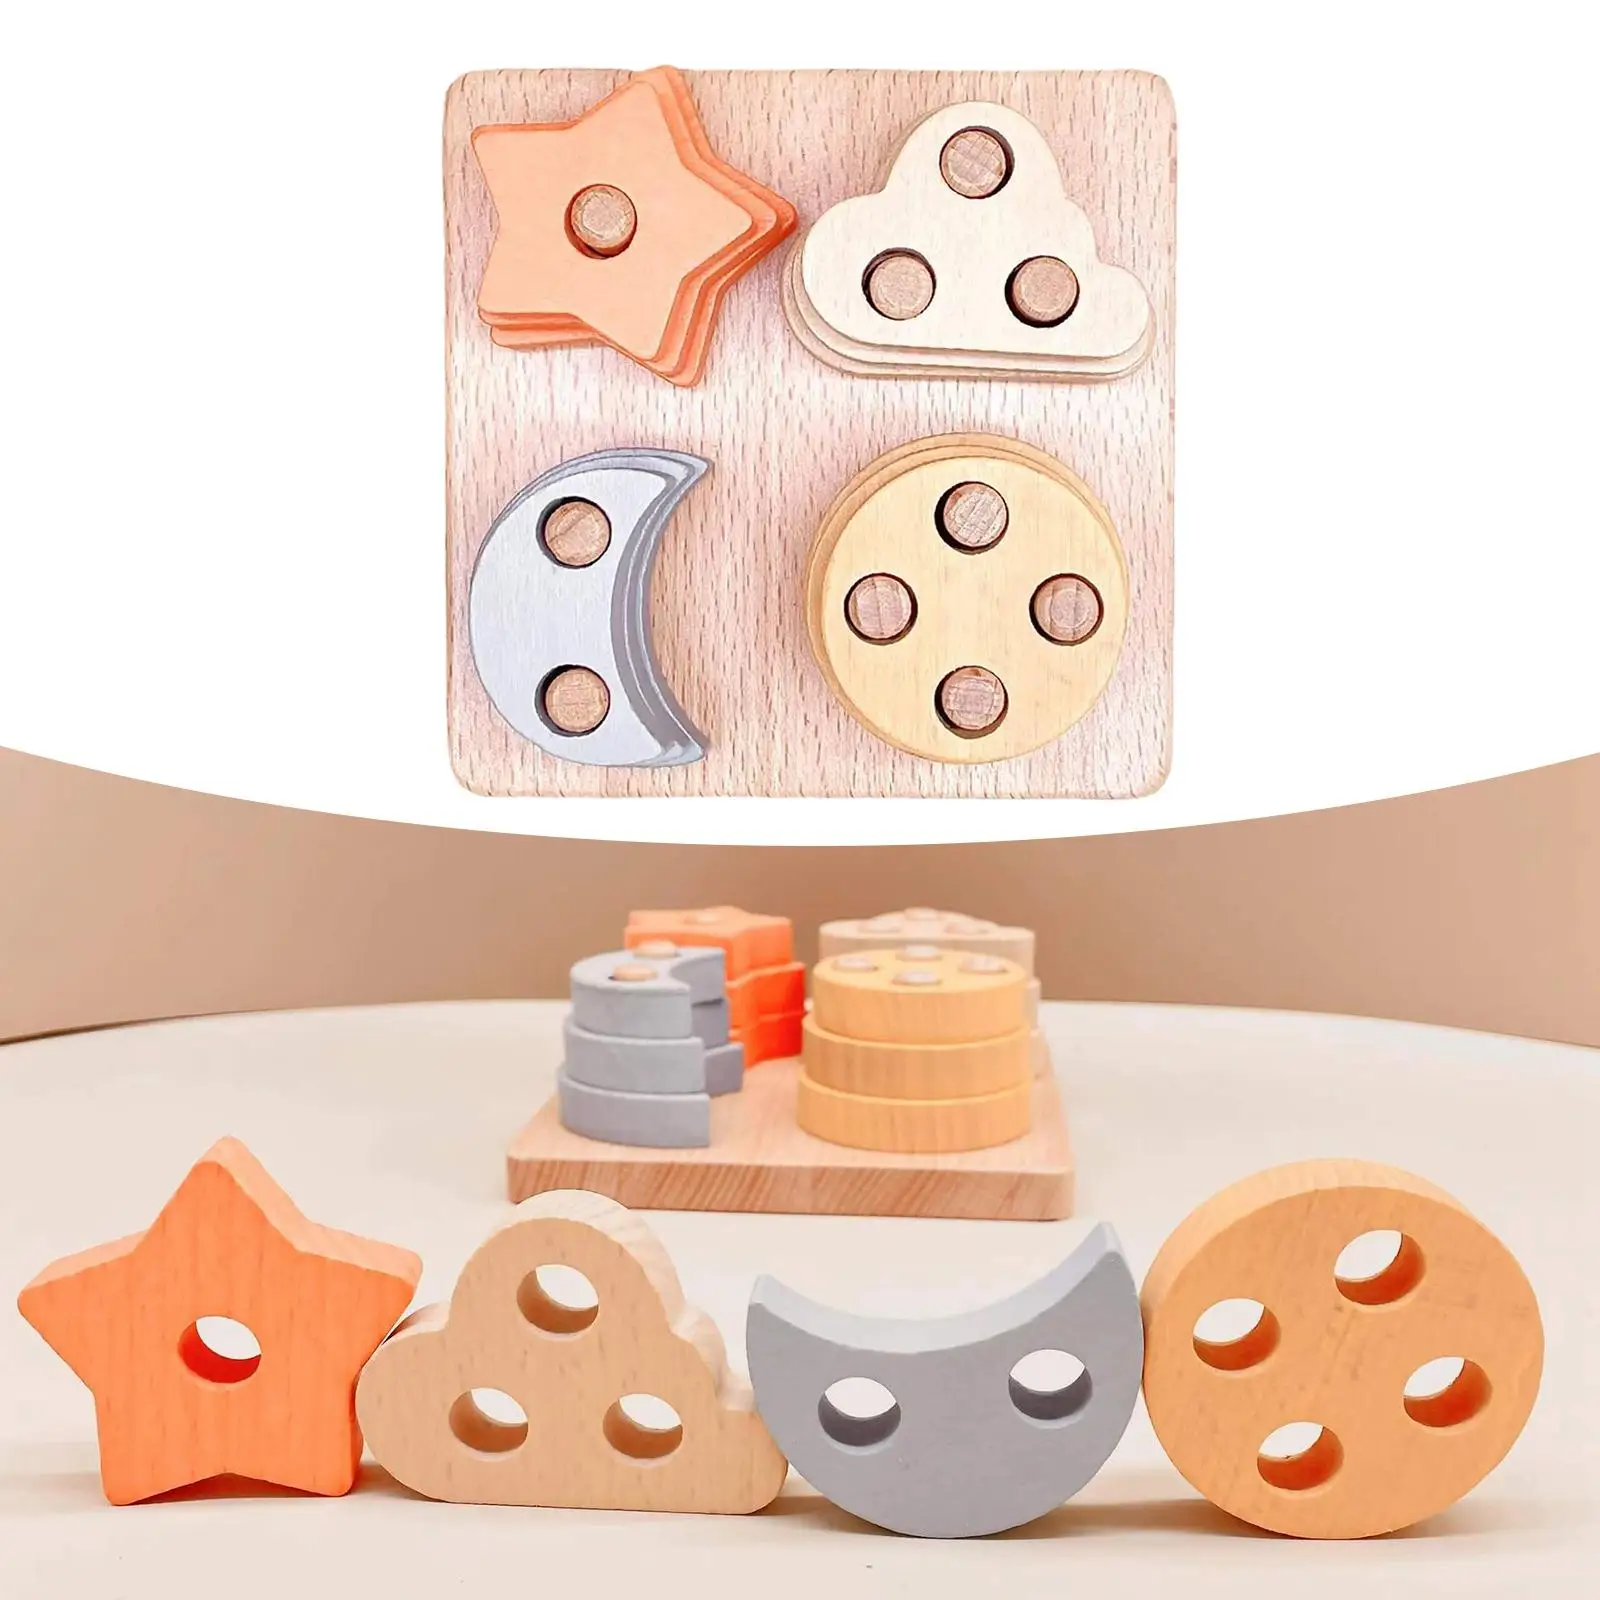 Geometric Shapes Toys Stacking Nesting Board Game Toys for Kids Boys Girls